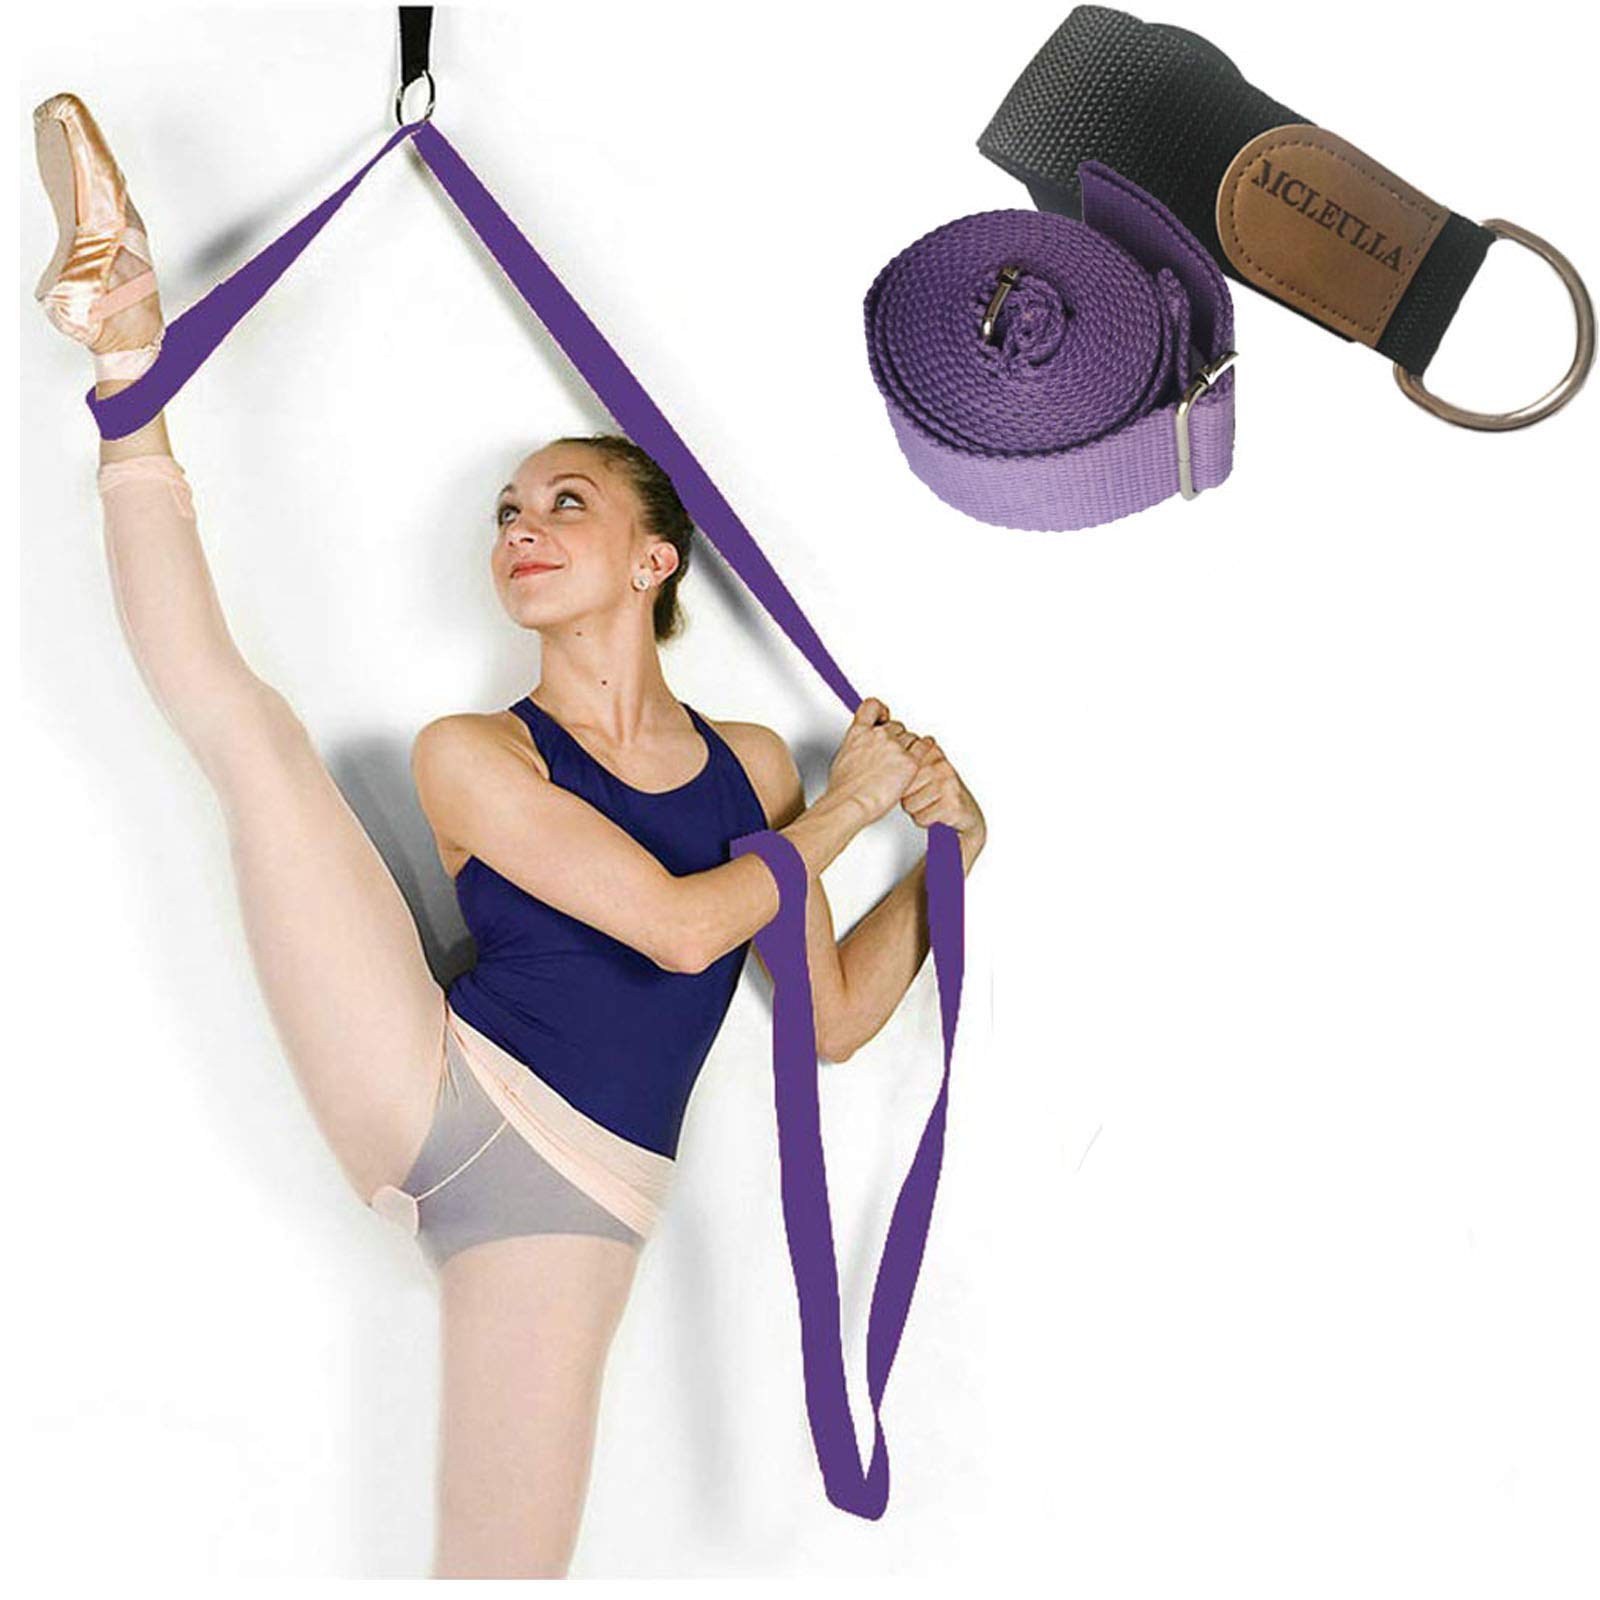 Leg Stretcher Band on Door - Get More Flexible - Ballet Yoga Pilates Flexibility Trainer To Improve Leg Stretching - Perfect Home Portable Equipment For Dance Gymnastic Exercise taekwondo & MMA